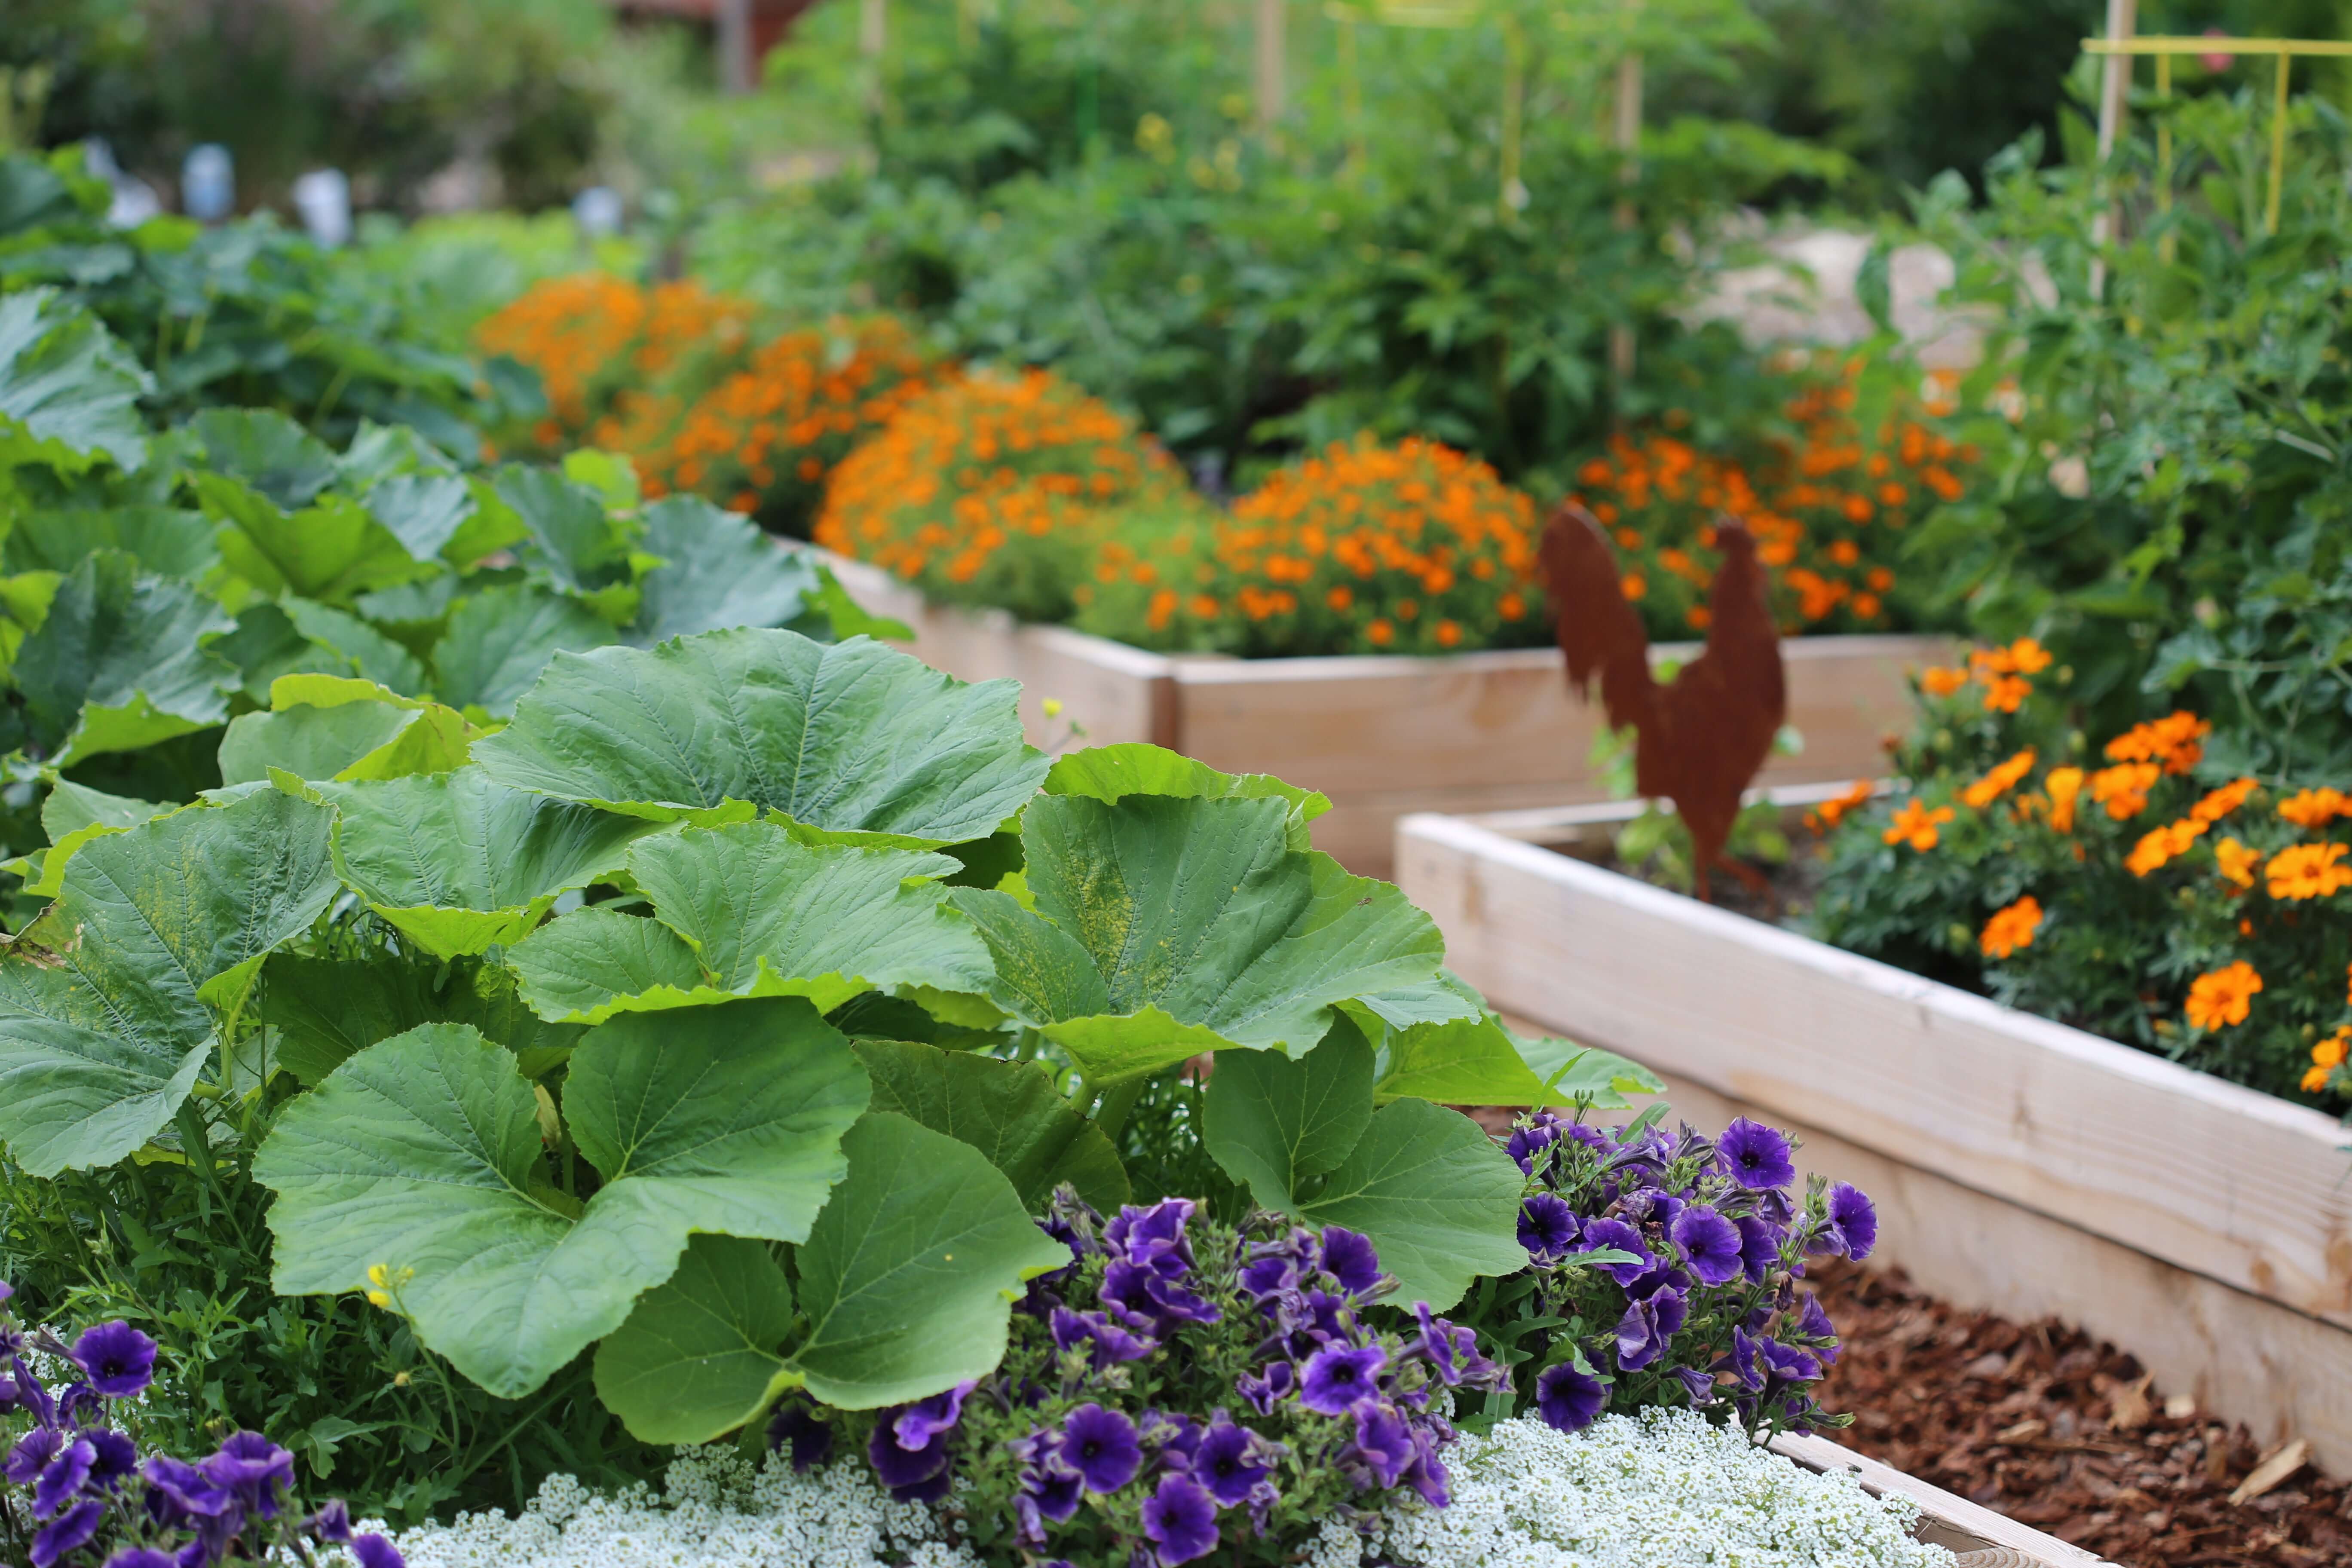 Raised Beds - What's all the Fuss About?